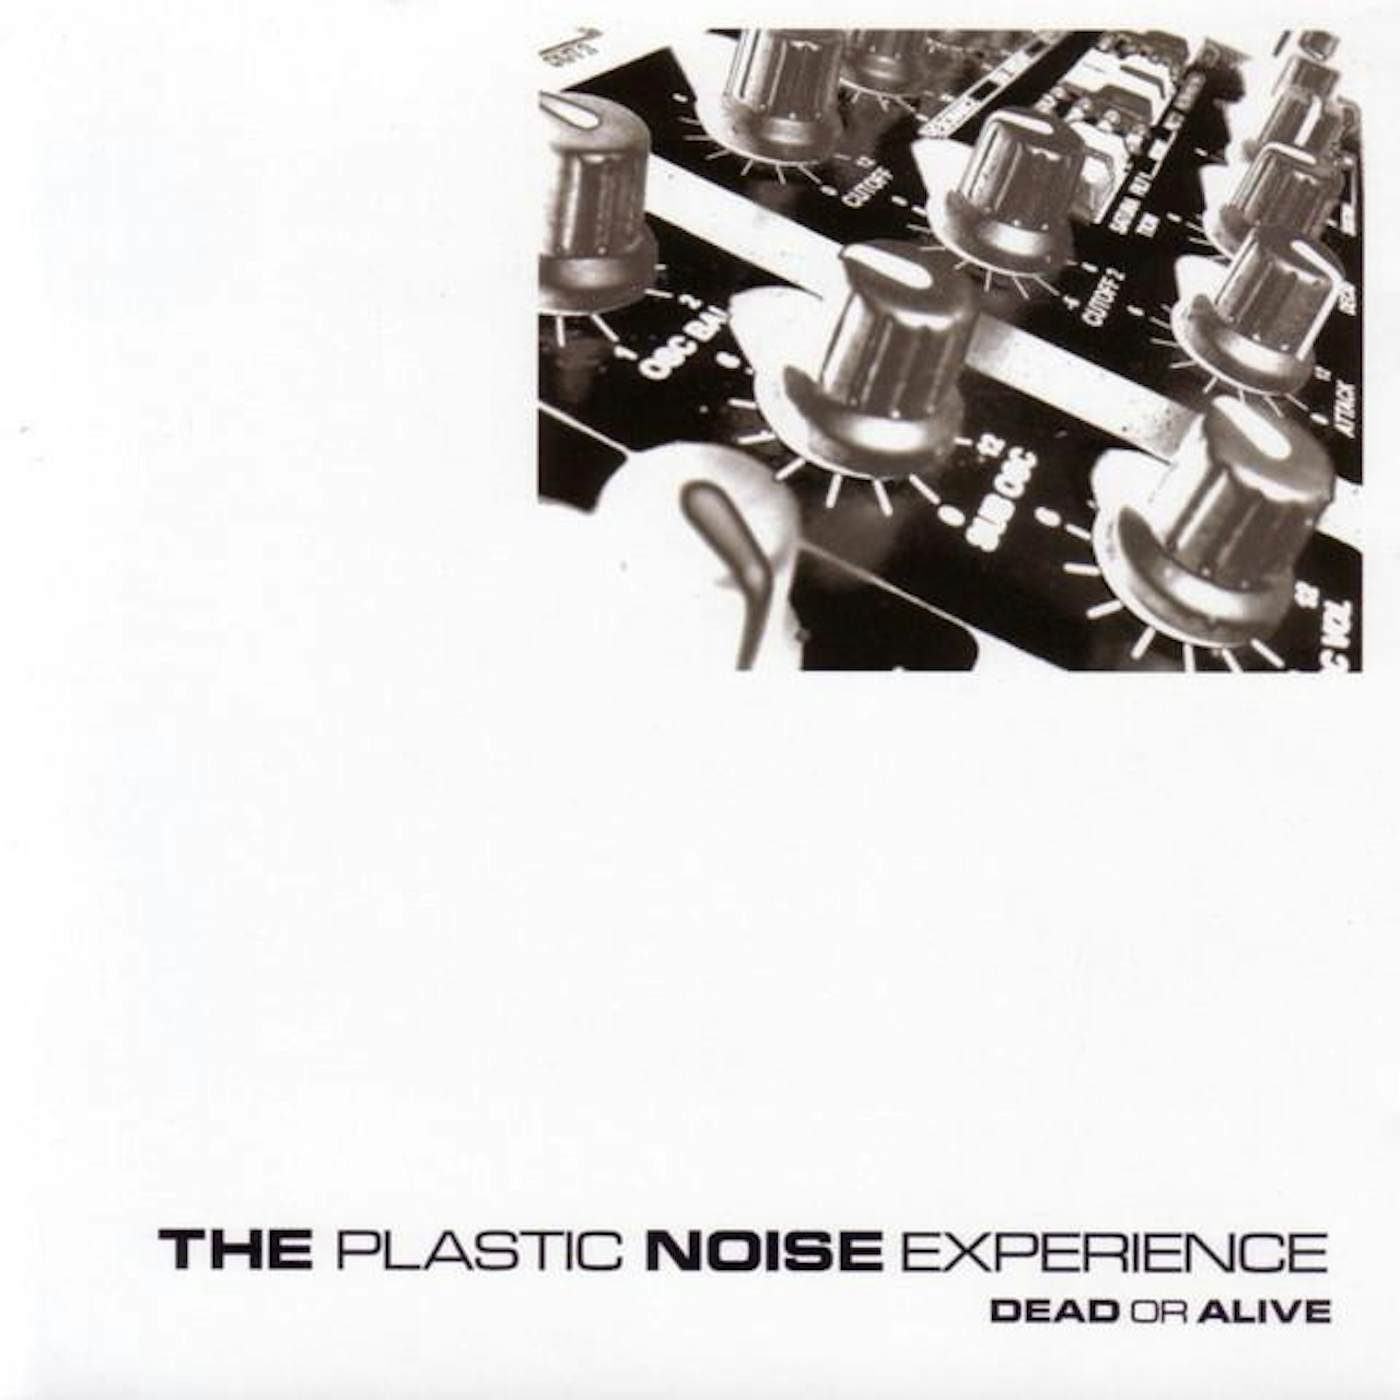 The Plastic Noise Experience